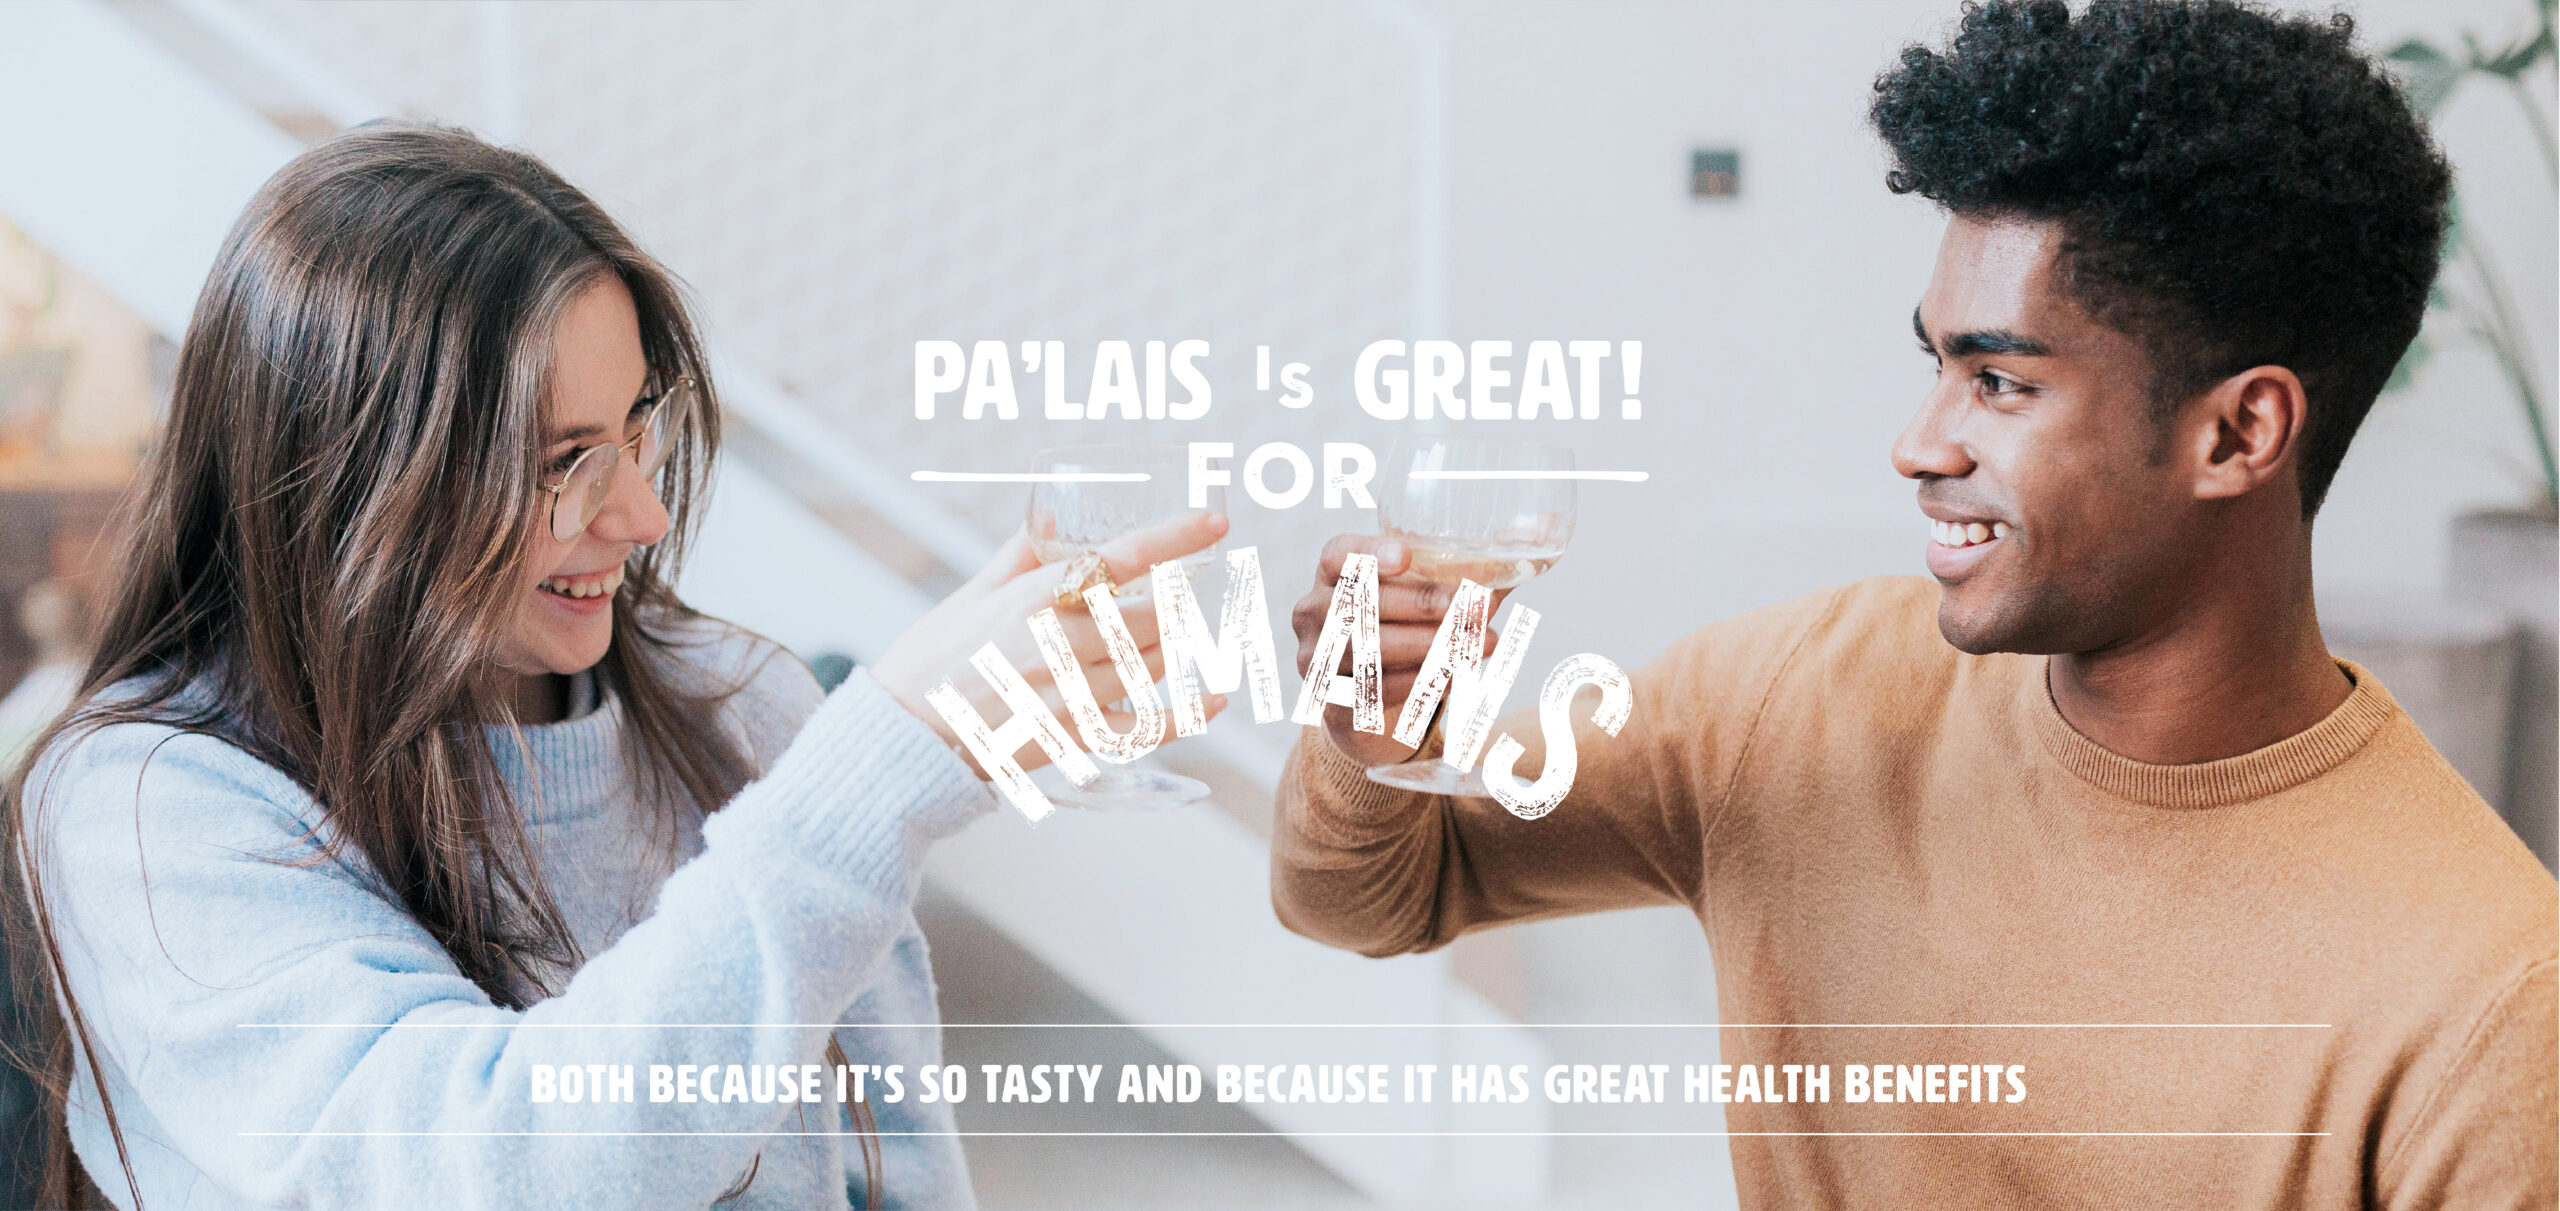 Example of visuals for Pa'lais' online visual identity by our Brussels communications agency